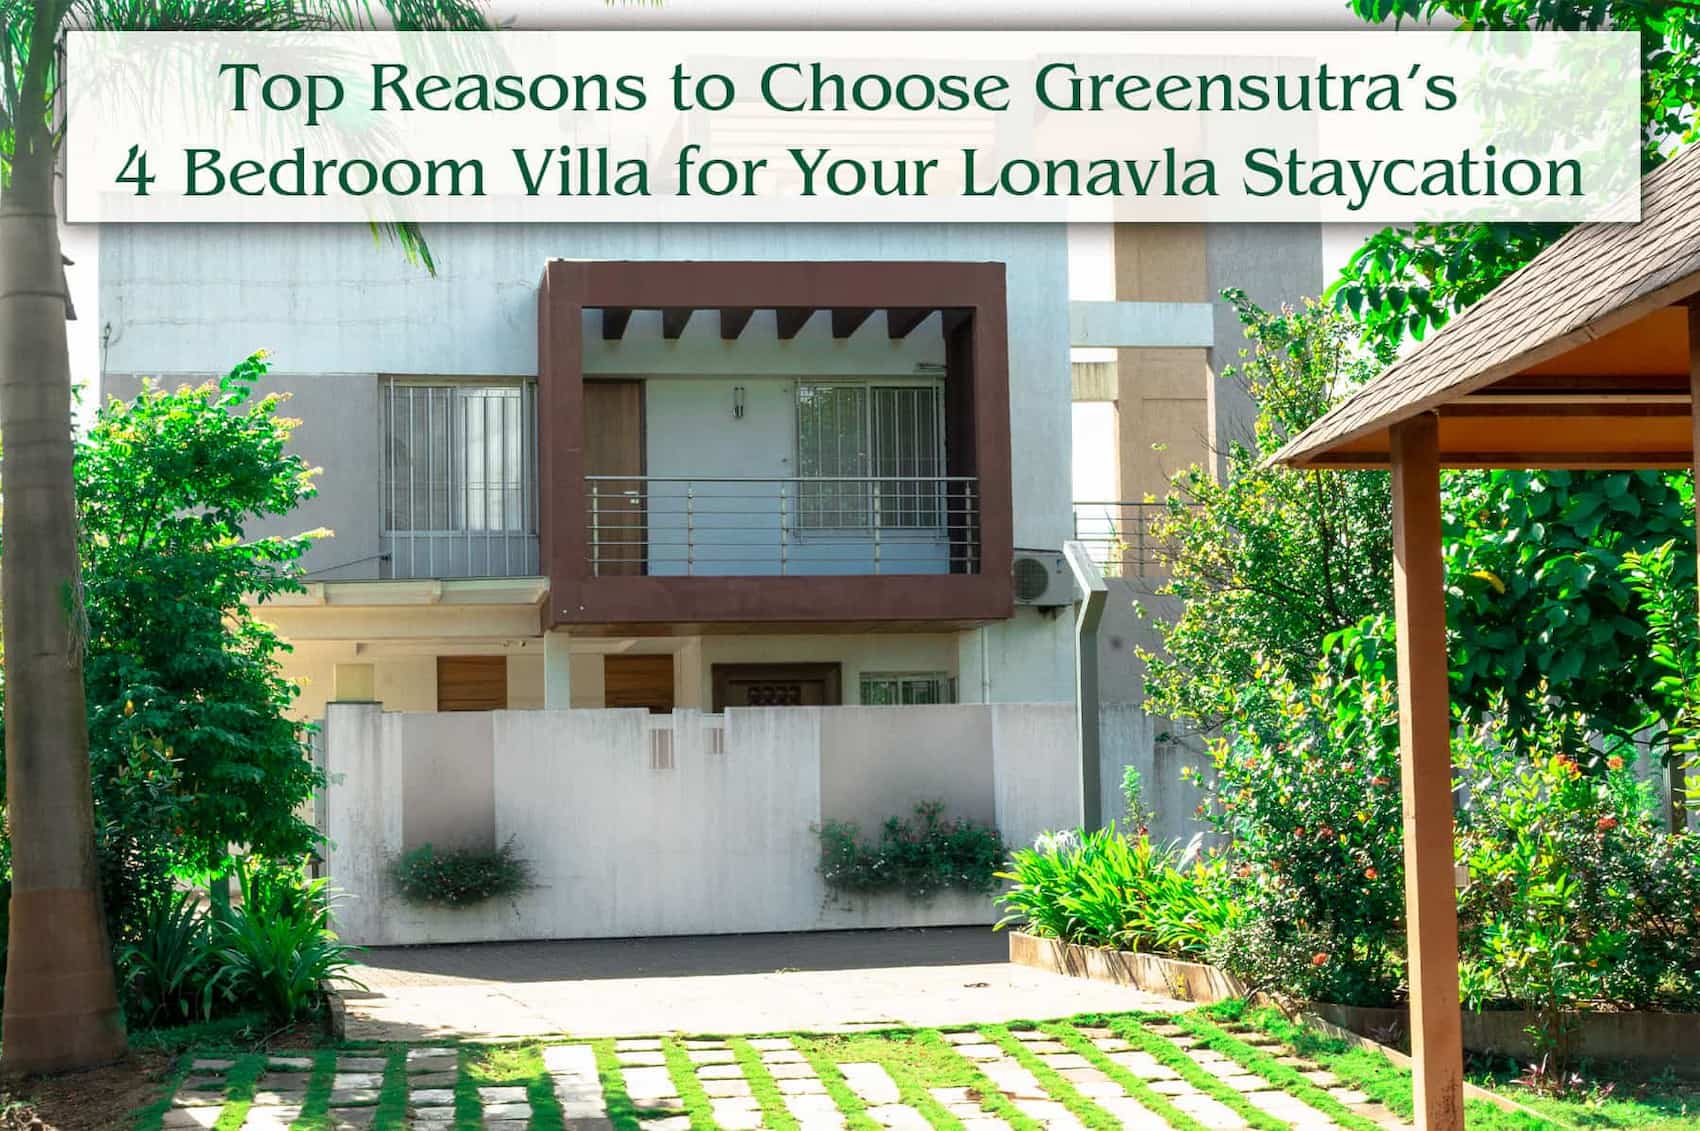 Top Reasons to Choose Greensutra’s 4 Bedroom Villa for Your Lonavla Staycation